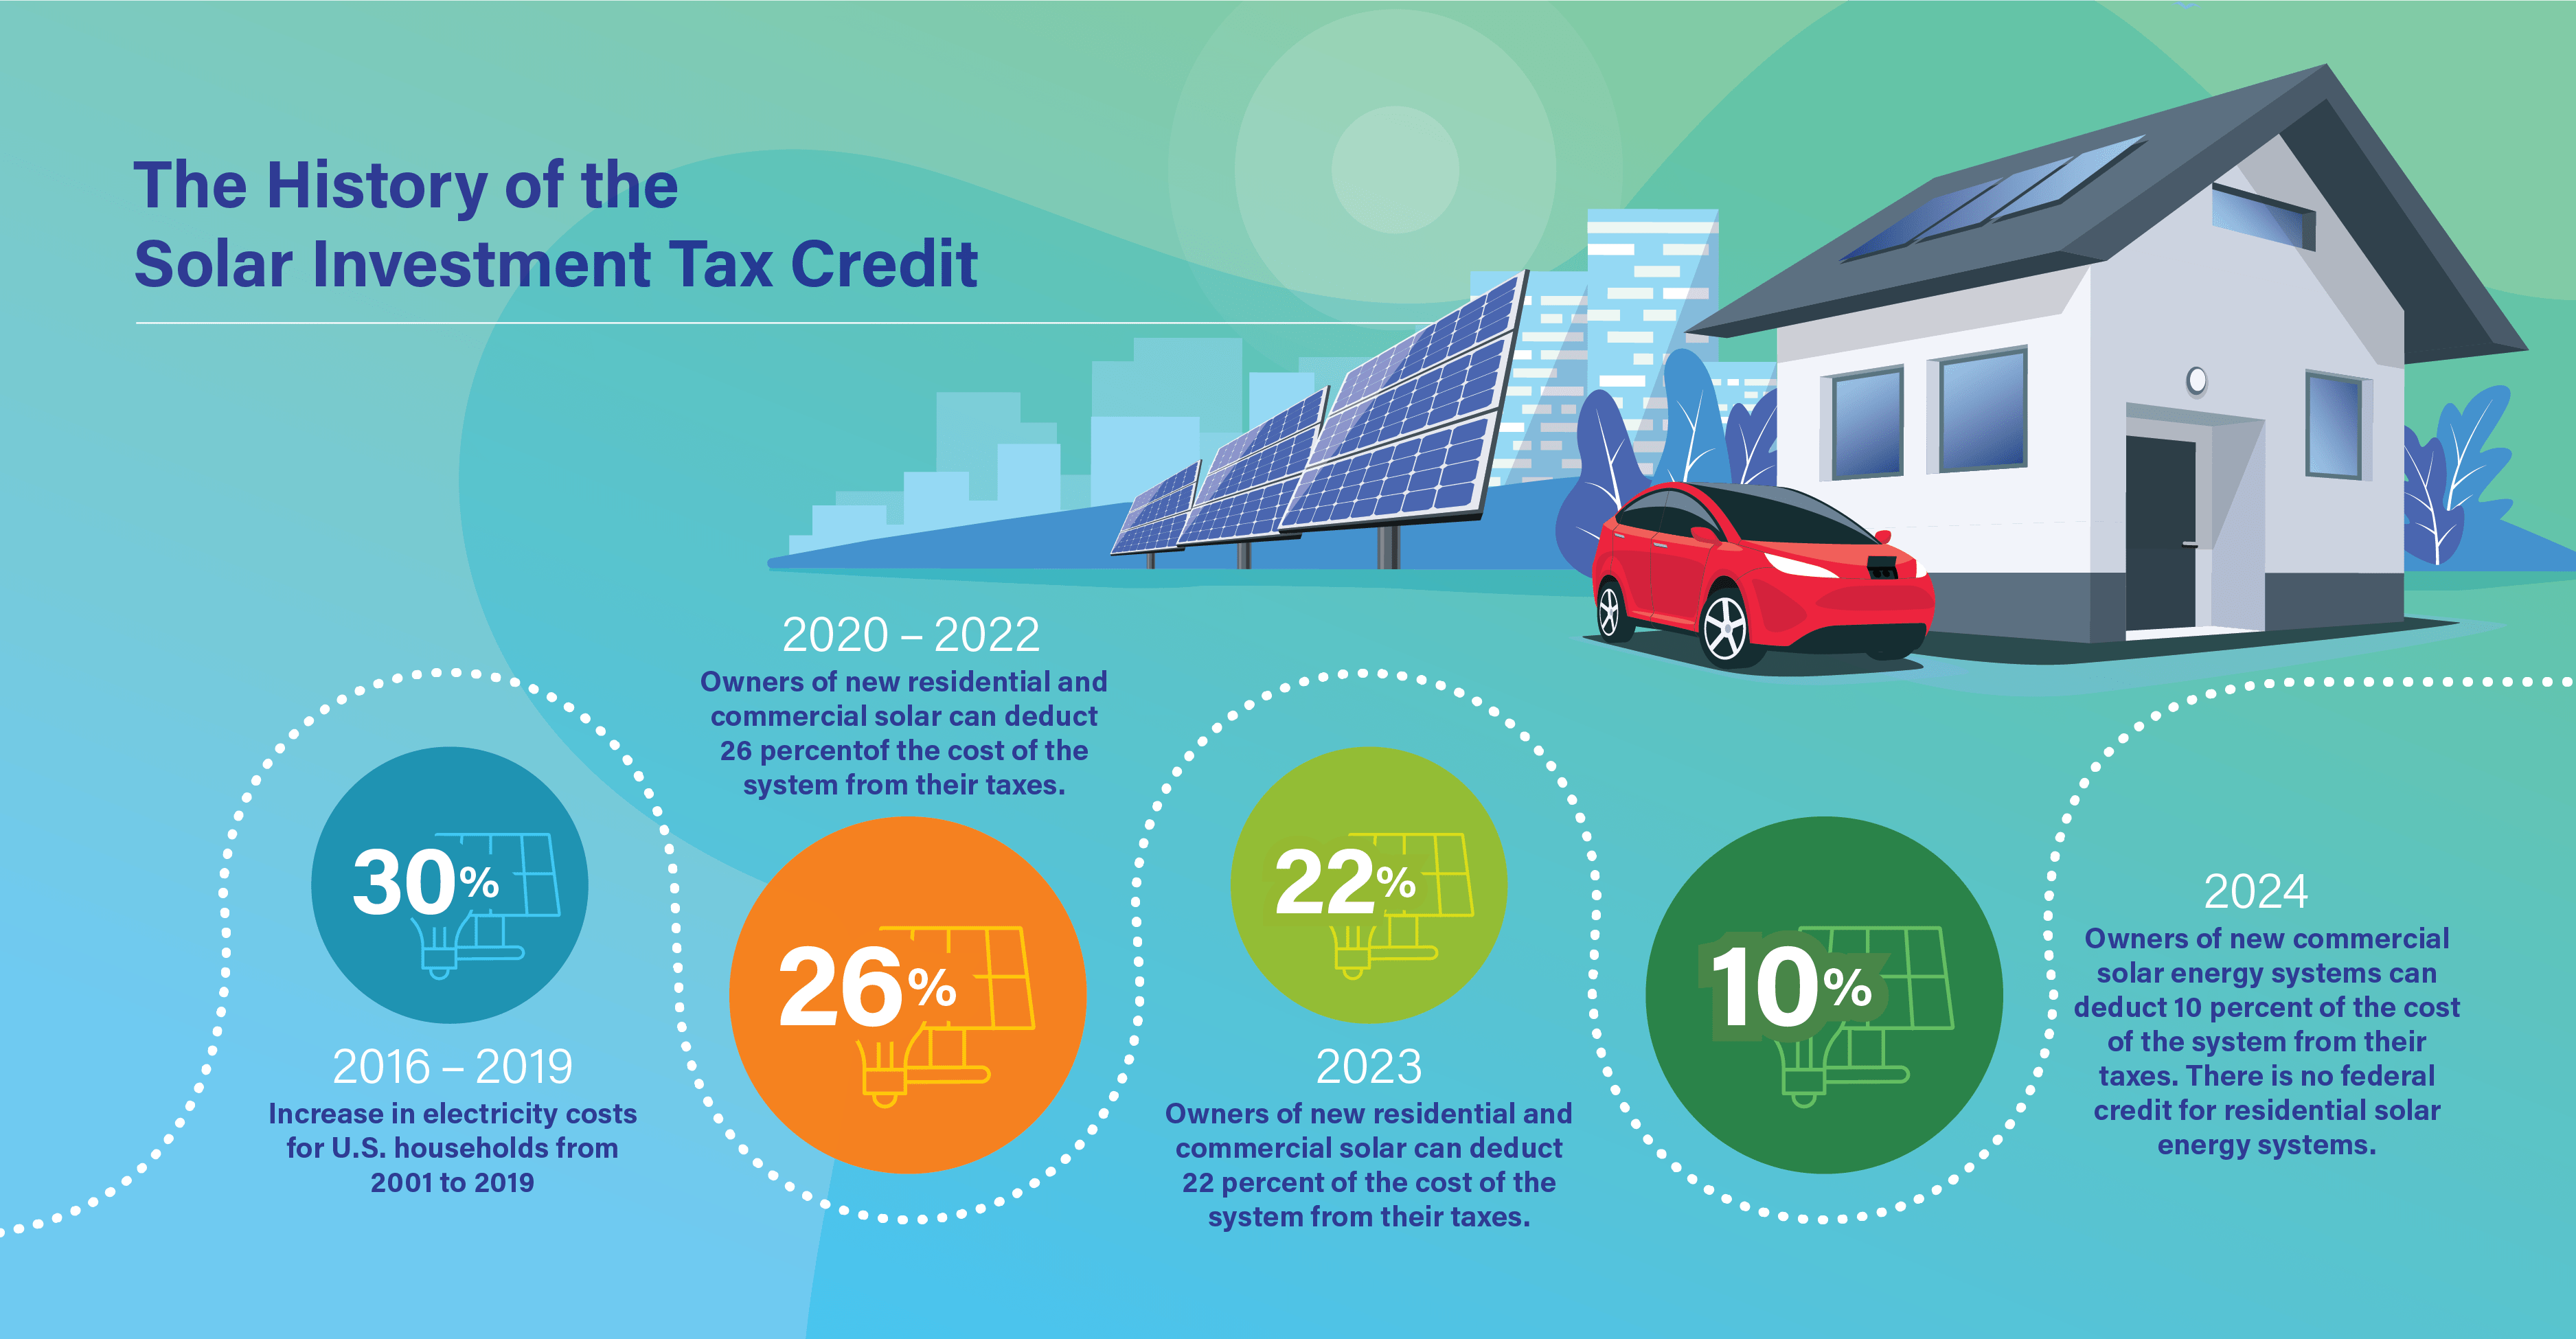 The history of the solar tax credit